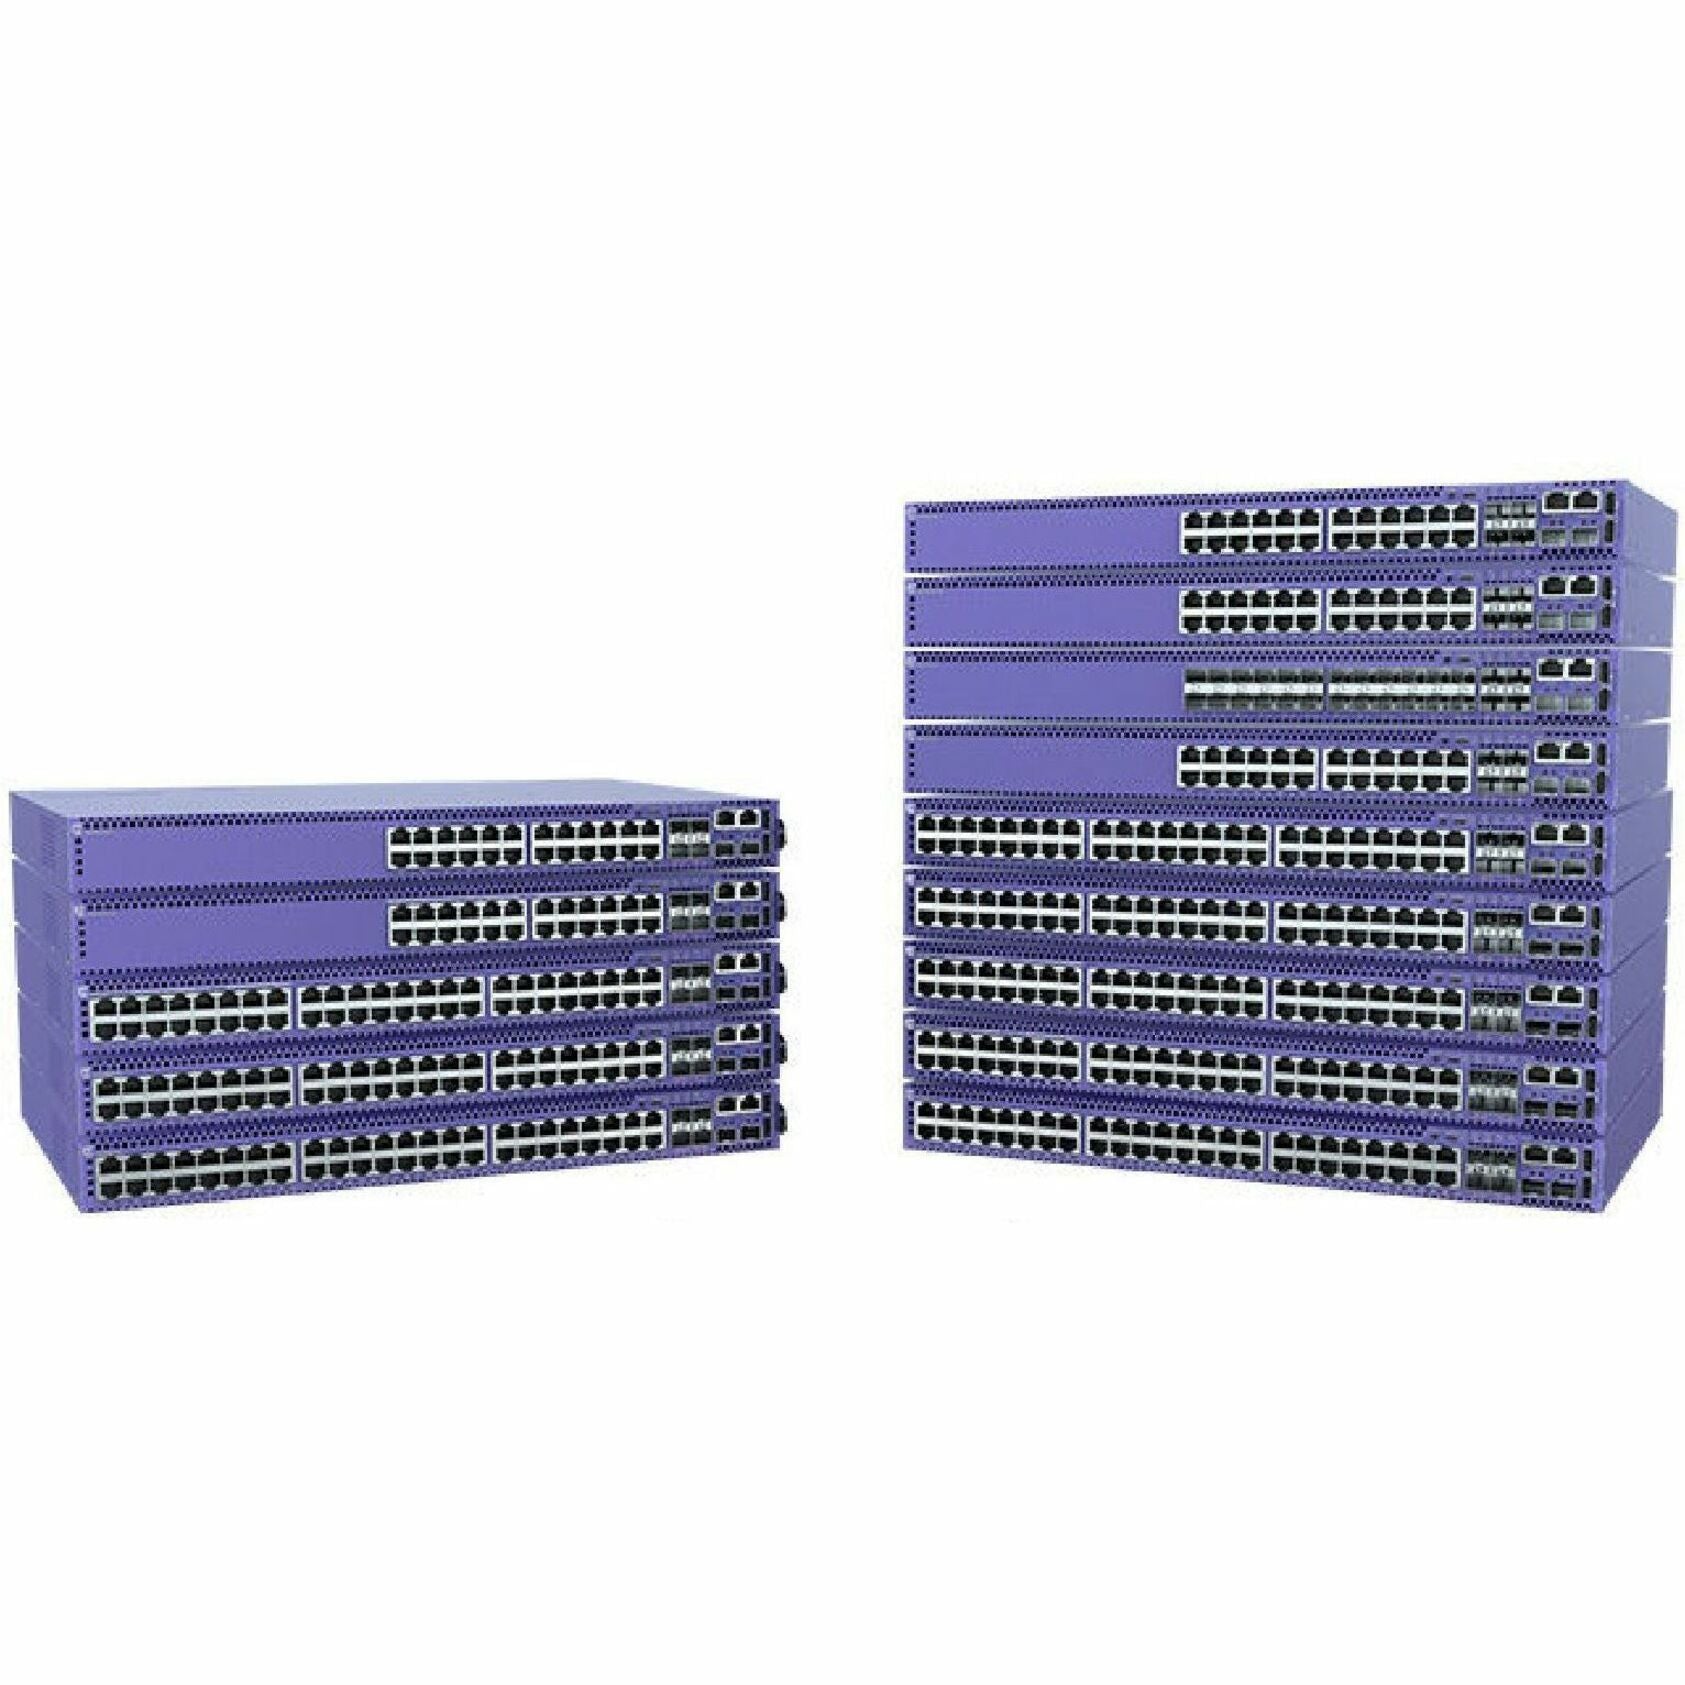 extreme-networks-5420f-24t-4xe-extremeswitching 5420f ethernet switch 24-port gigabit ethernet network 4 x 10 gigabit ethernet expansion slot stackable